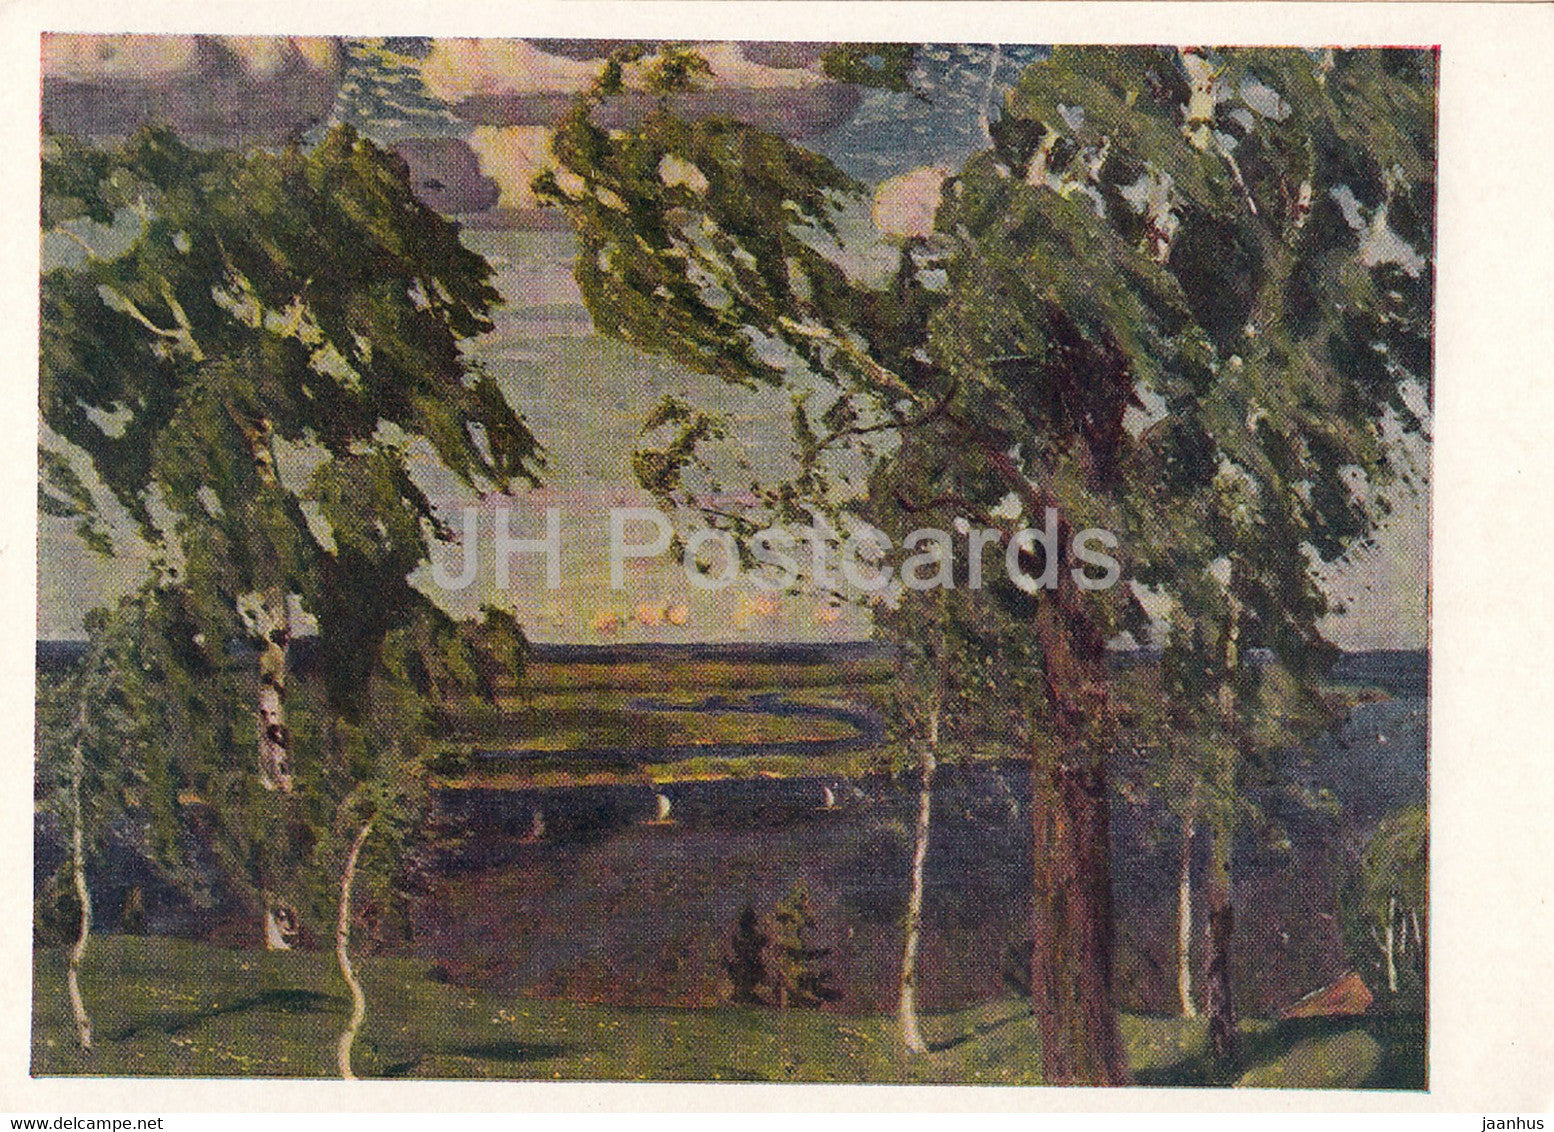 painting by A. Rylov - Green Noise - Russian art - 1961 - Russia USSR - unused - JH Postcards